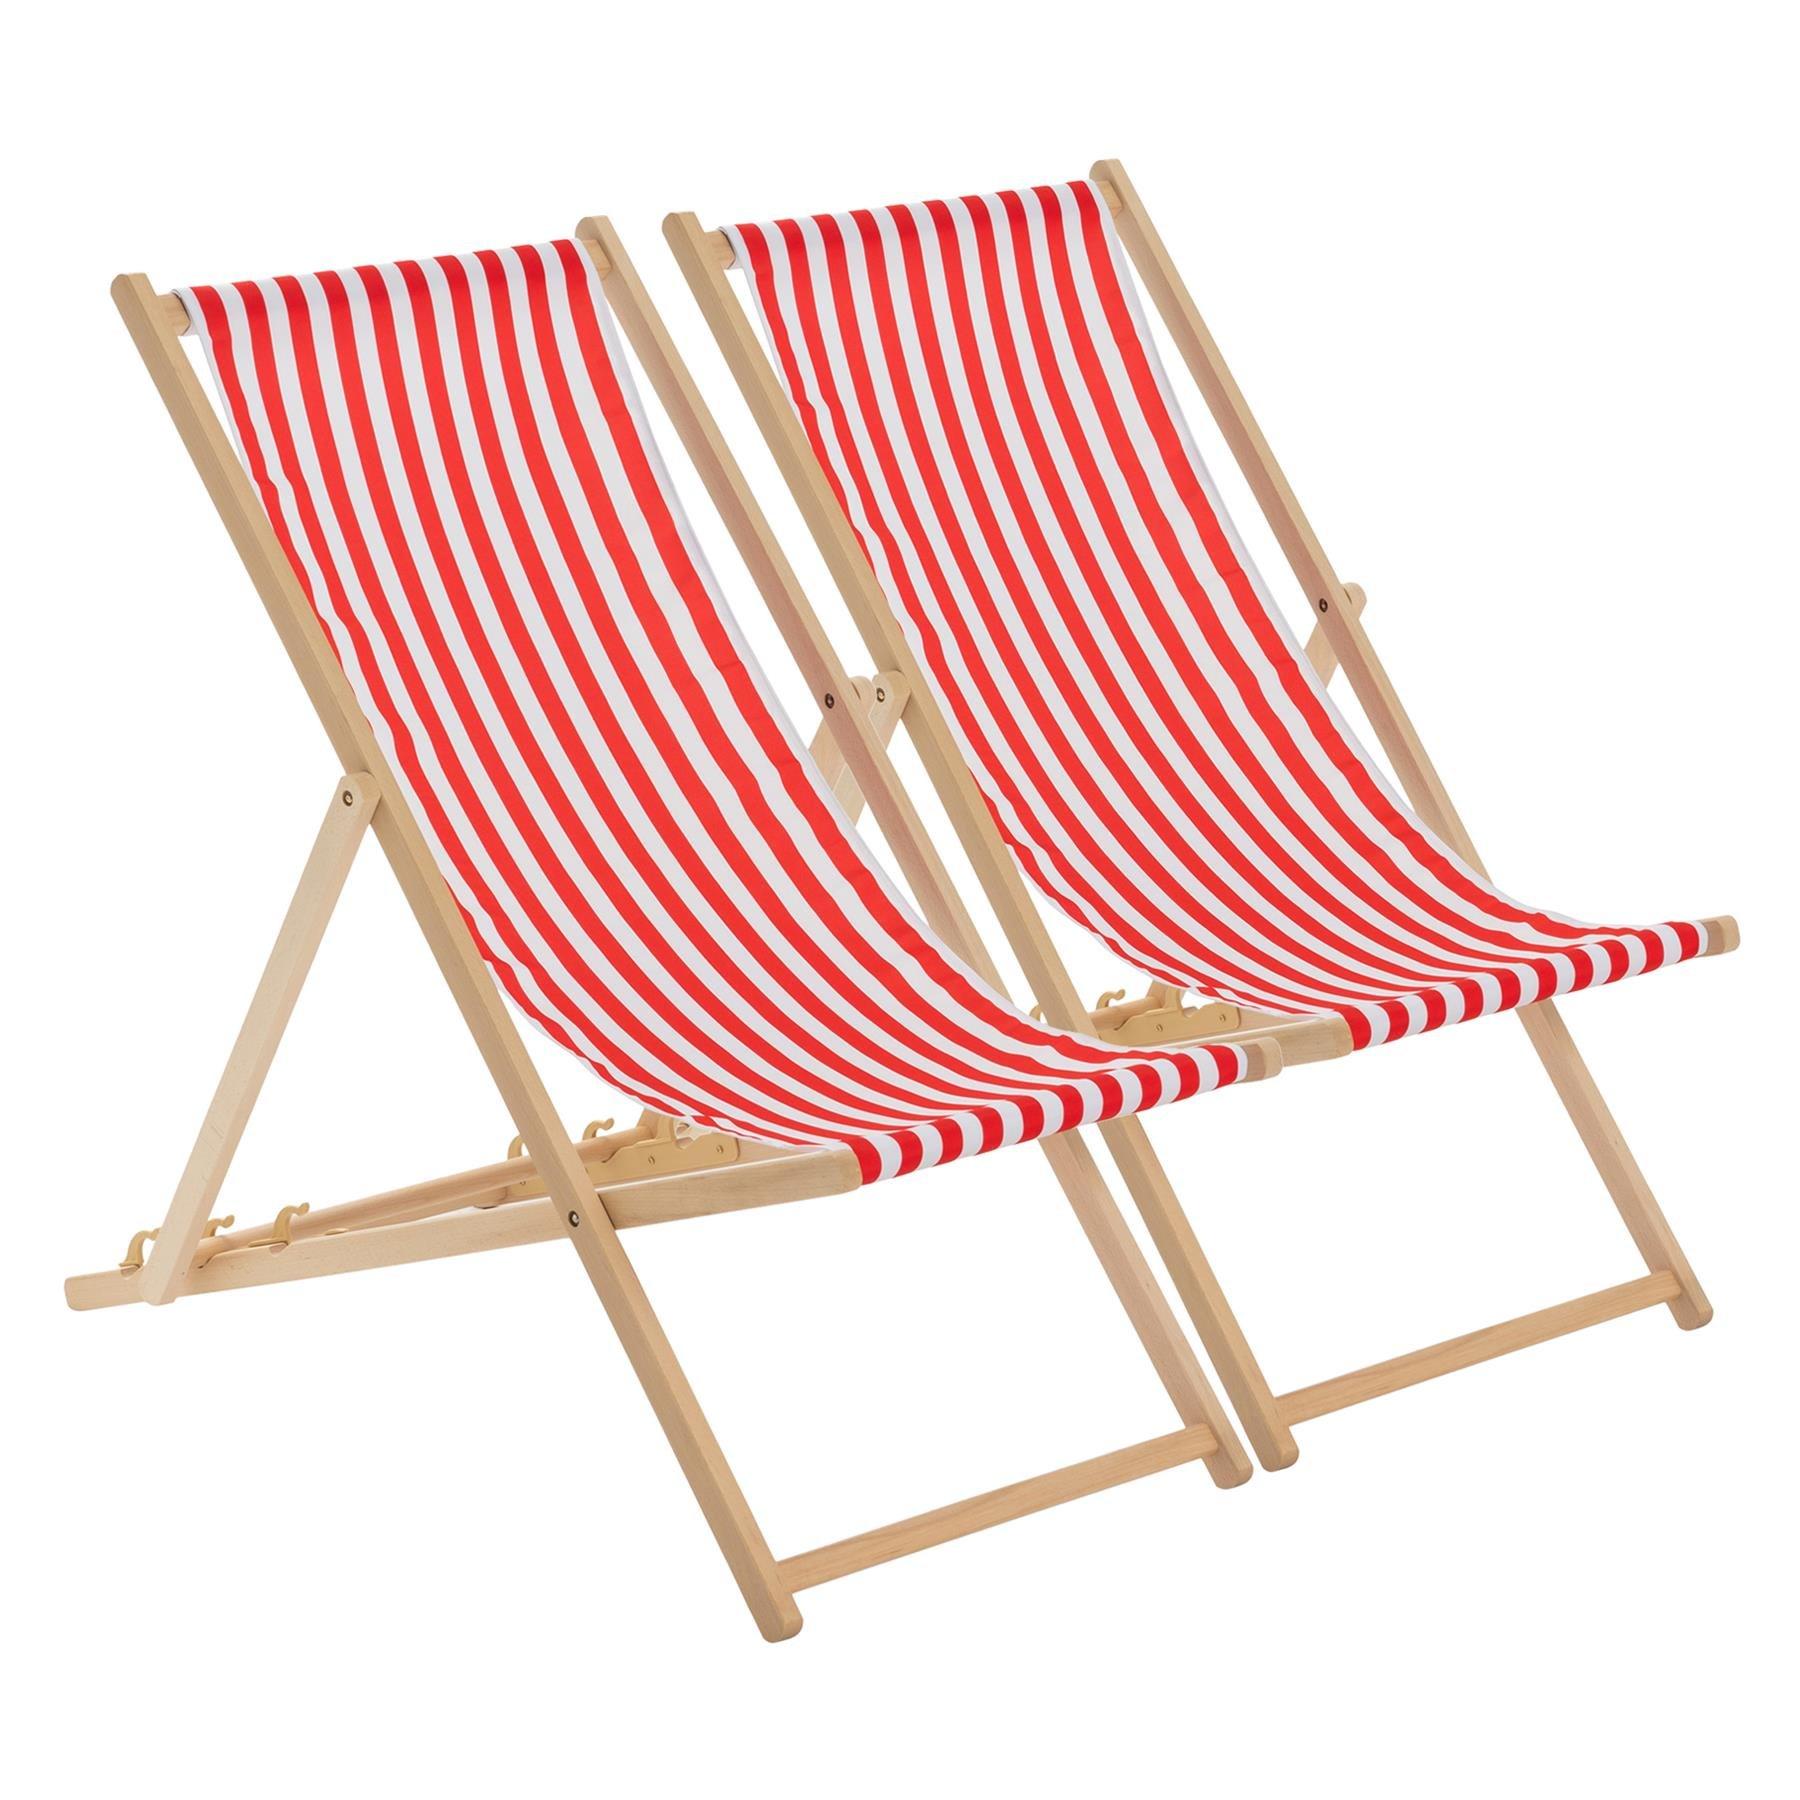 Folding Wooden Deck Chairs Red Stripe Pack of 2